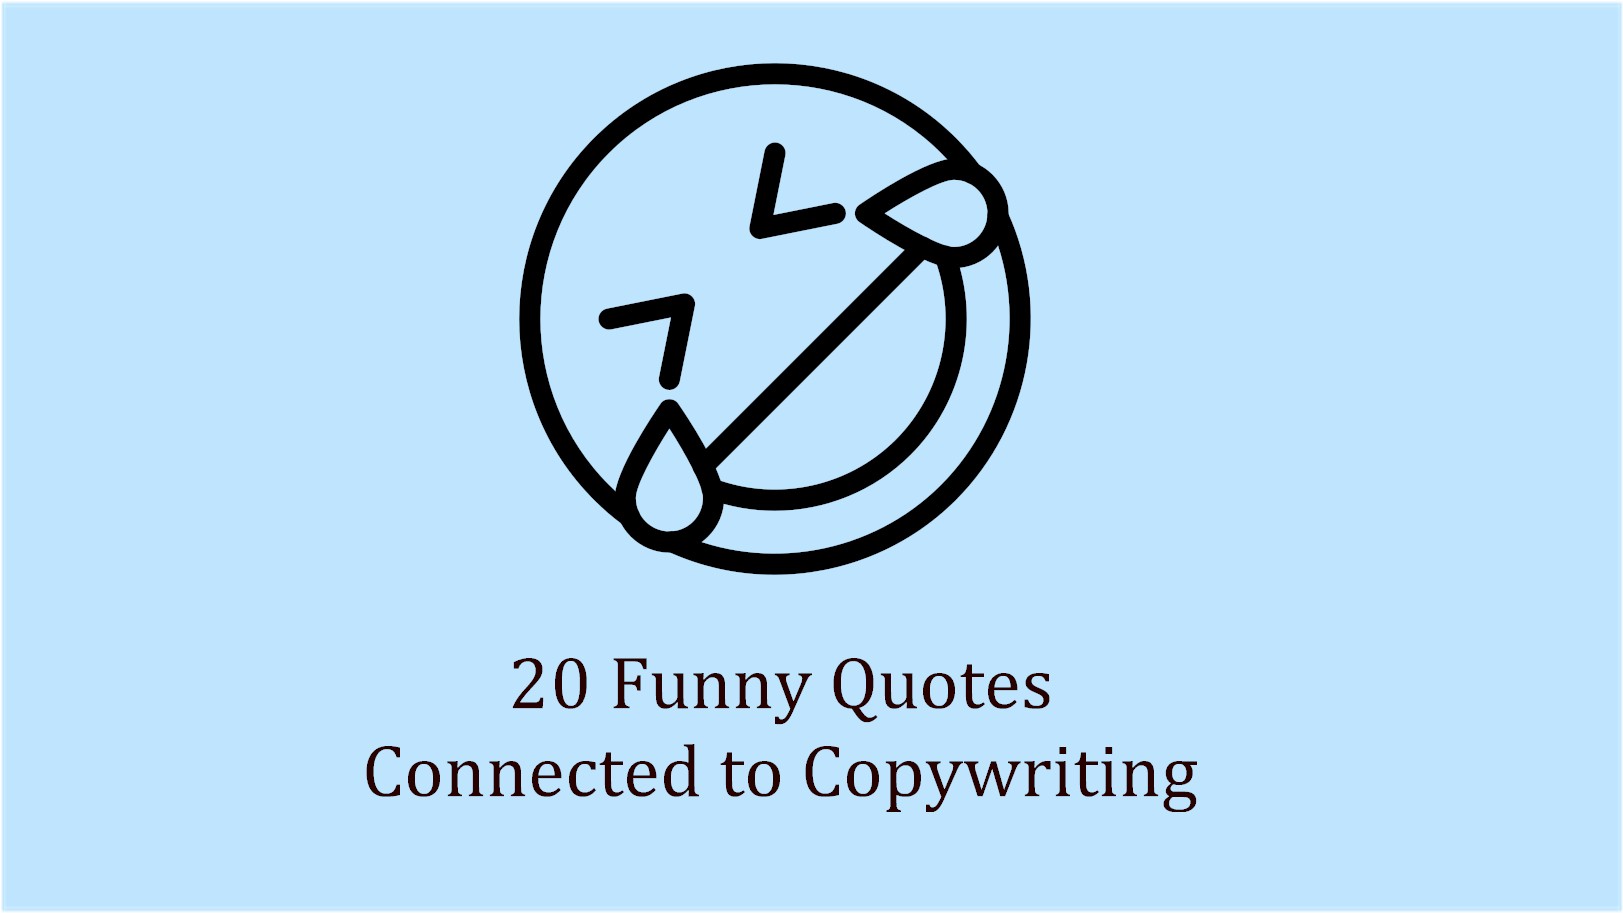 20 Funny Quotes Connected to Copywriting: Keep Smiling -